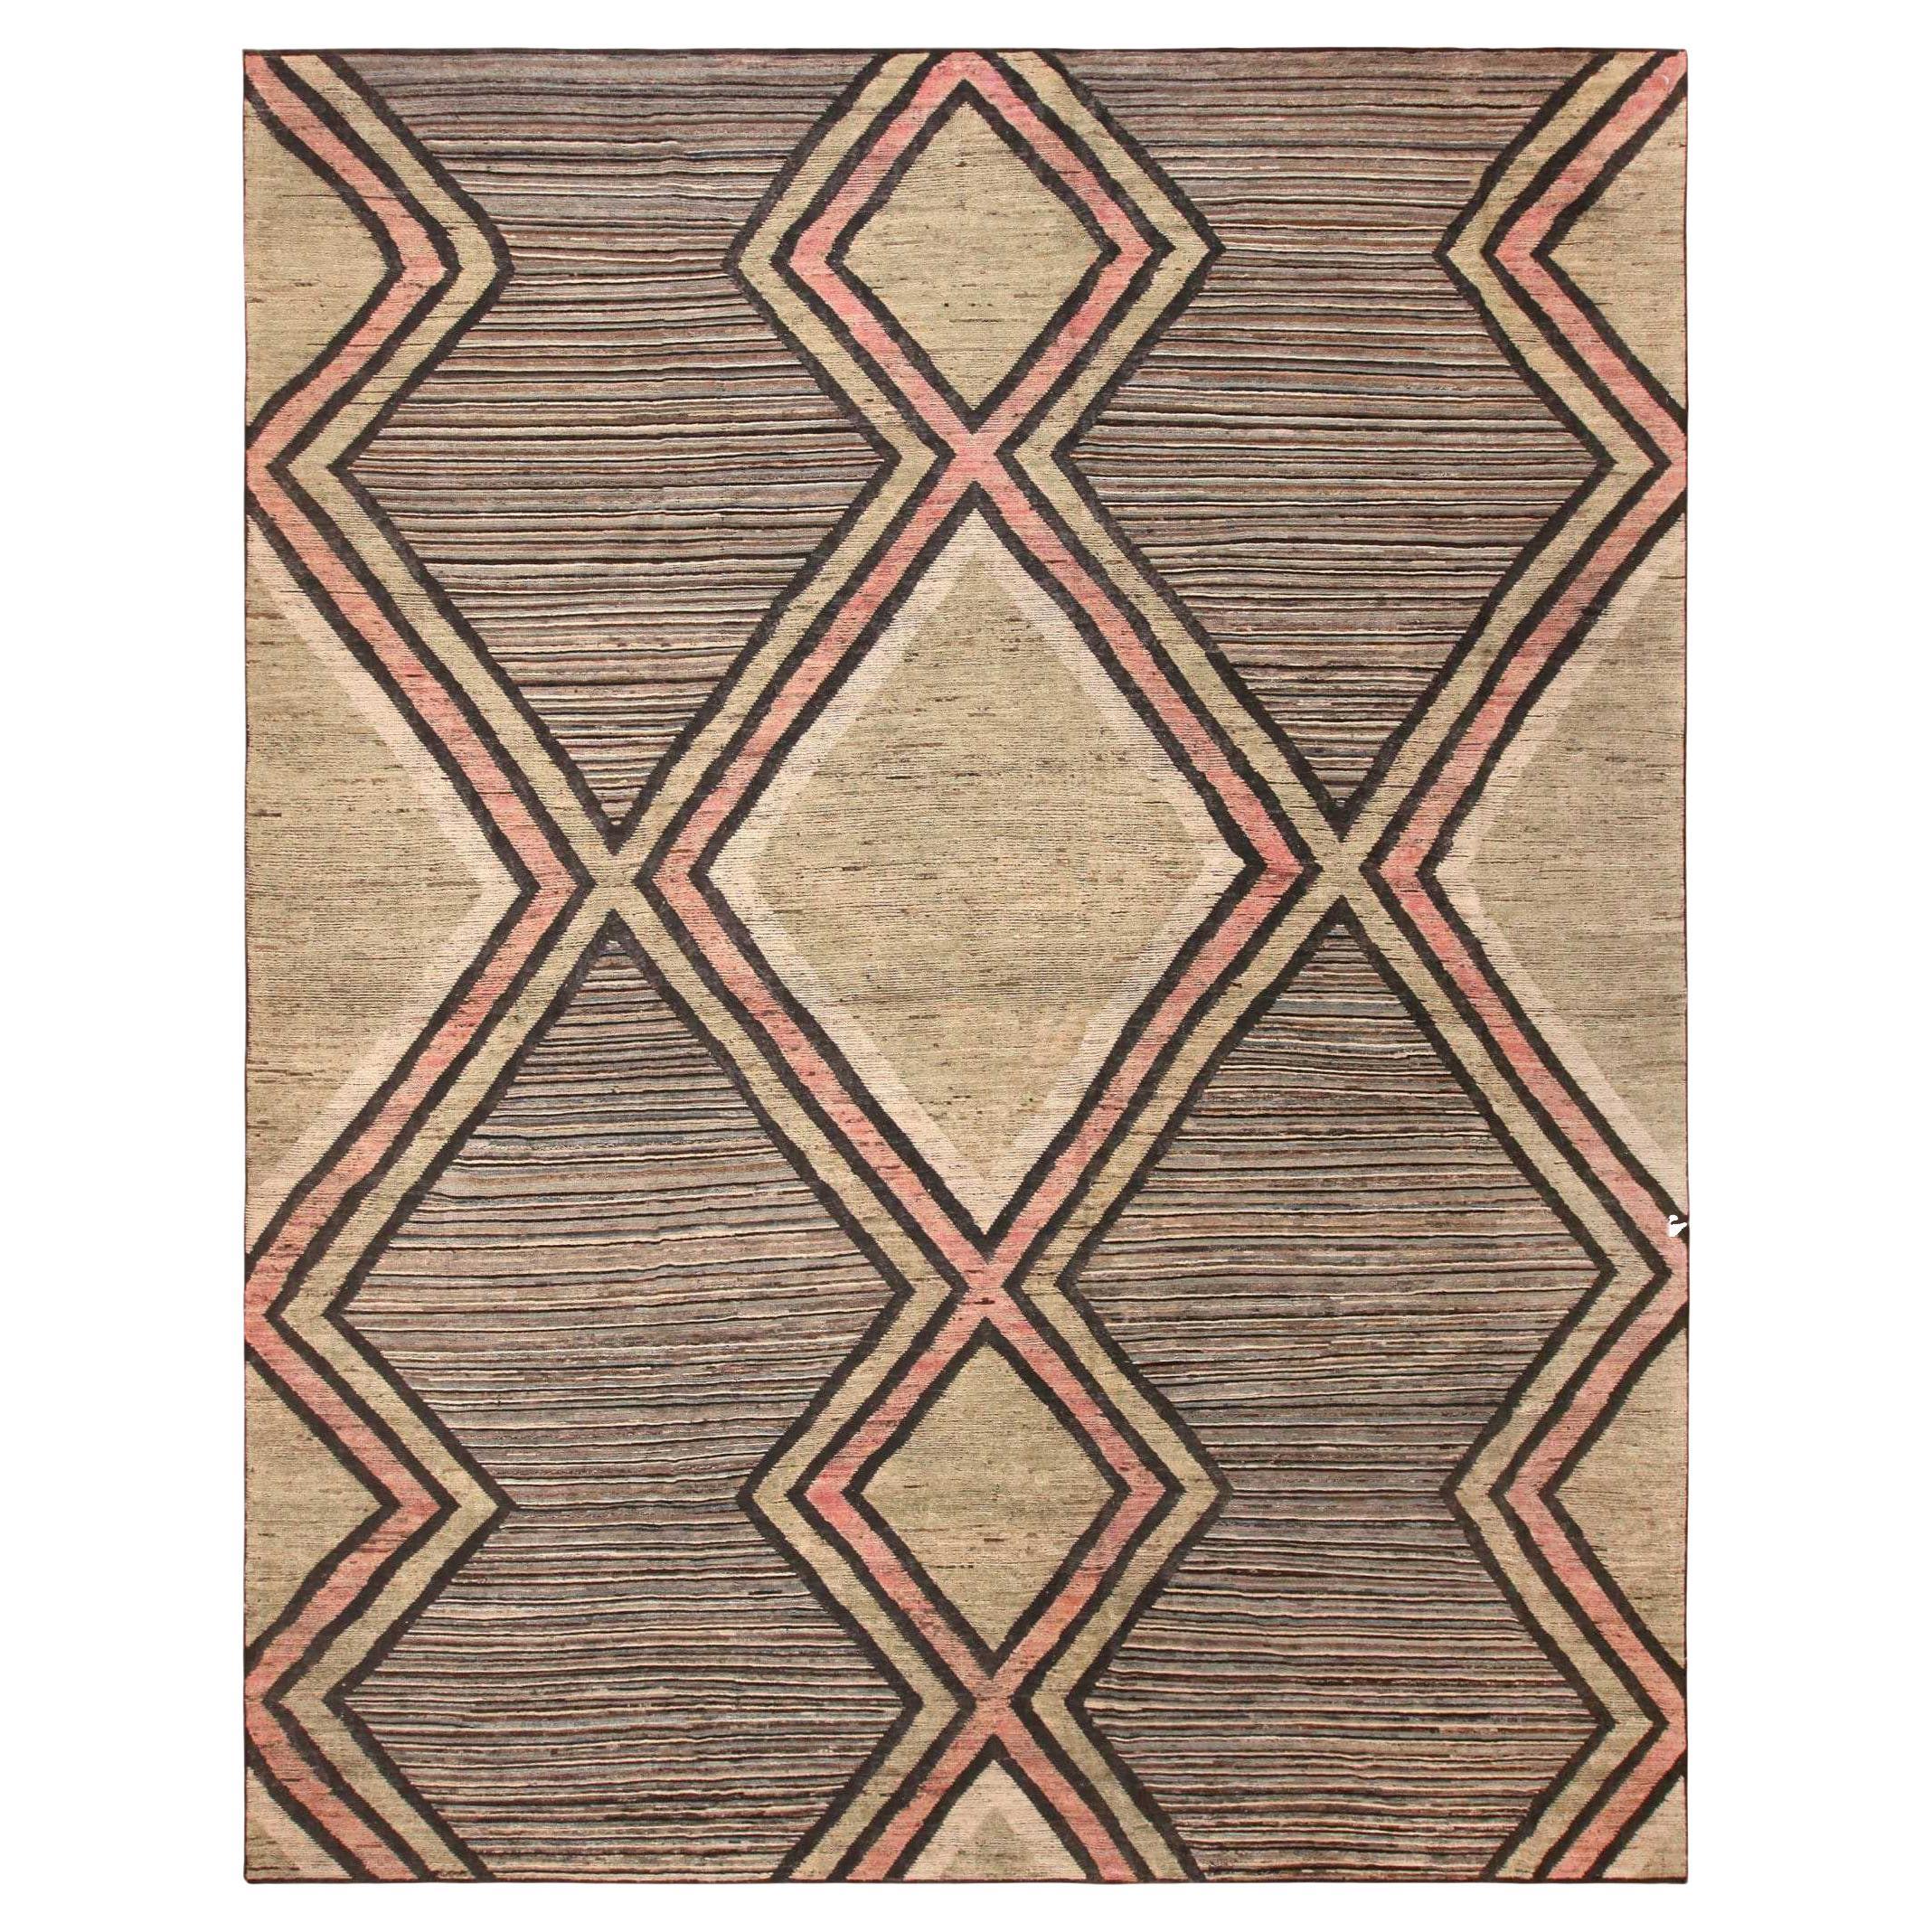 Nazmiyal Collection Eye-Catching Large Geometric Modern Area Rug 12' x 15'3" For Sale